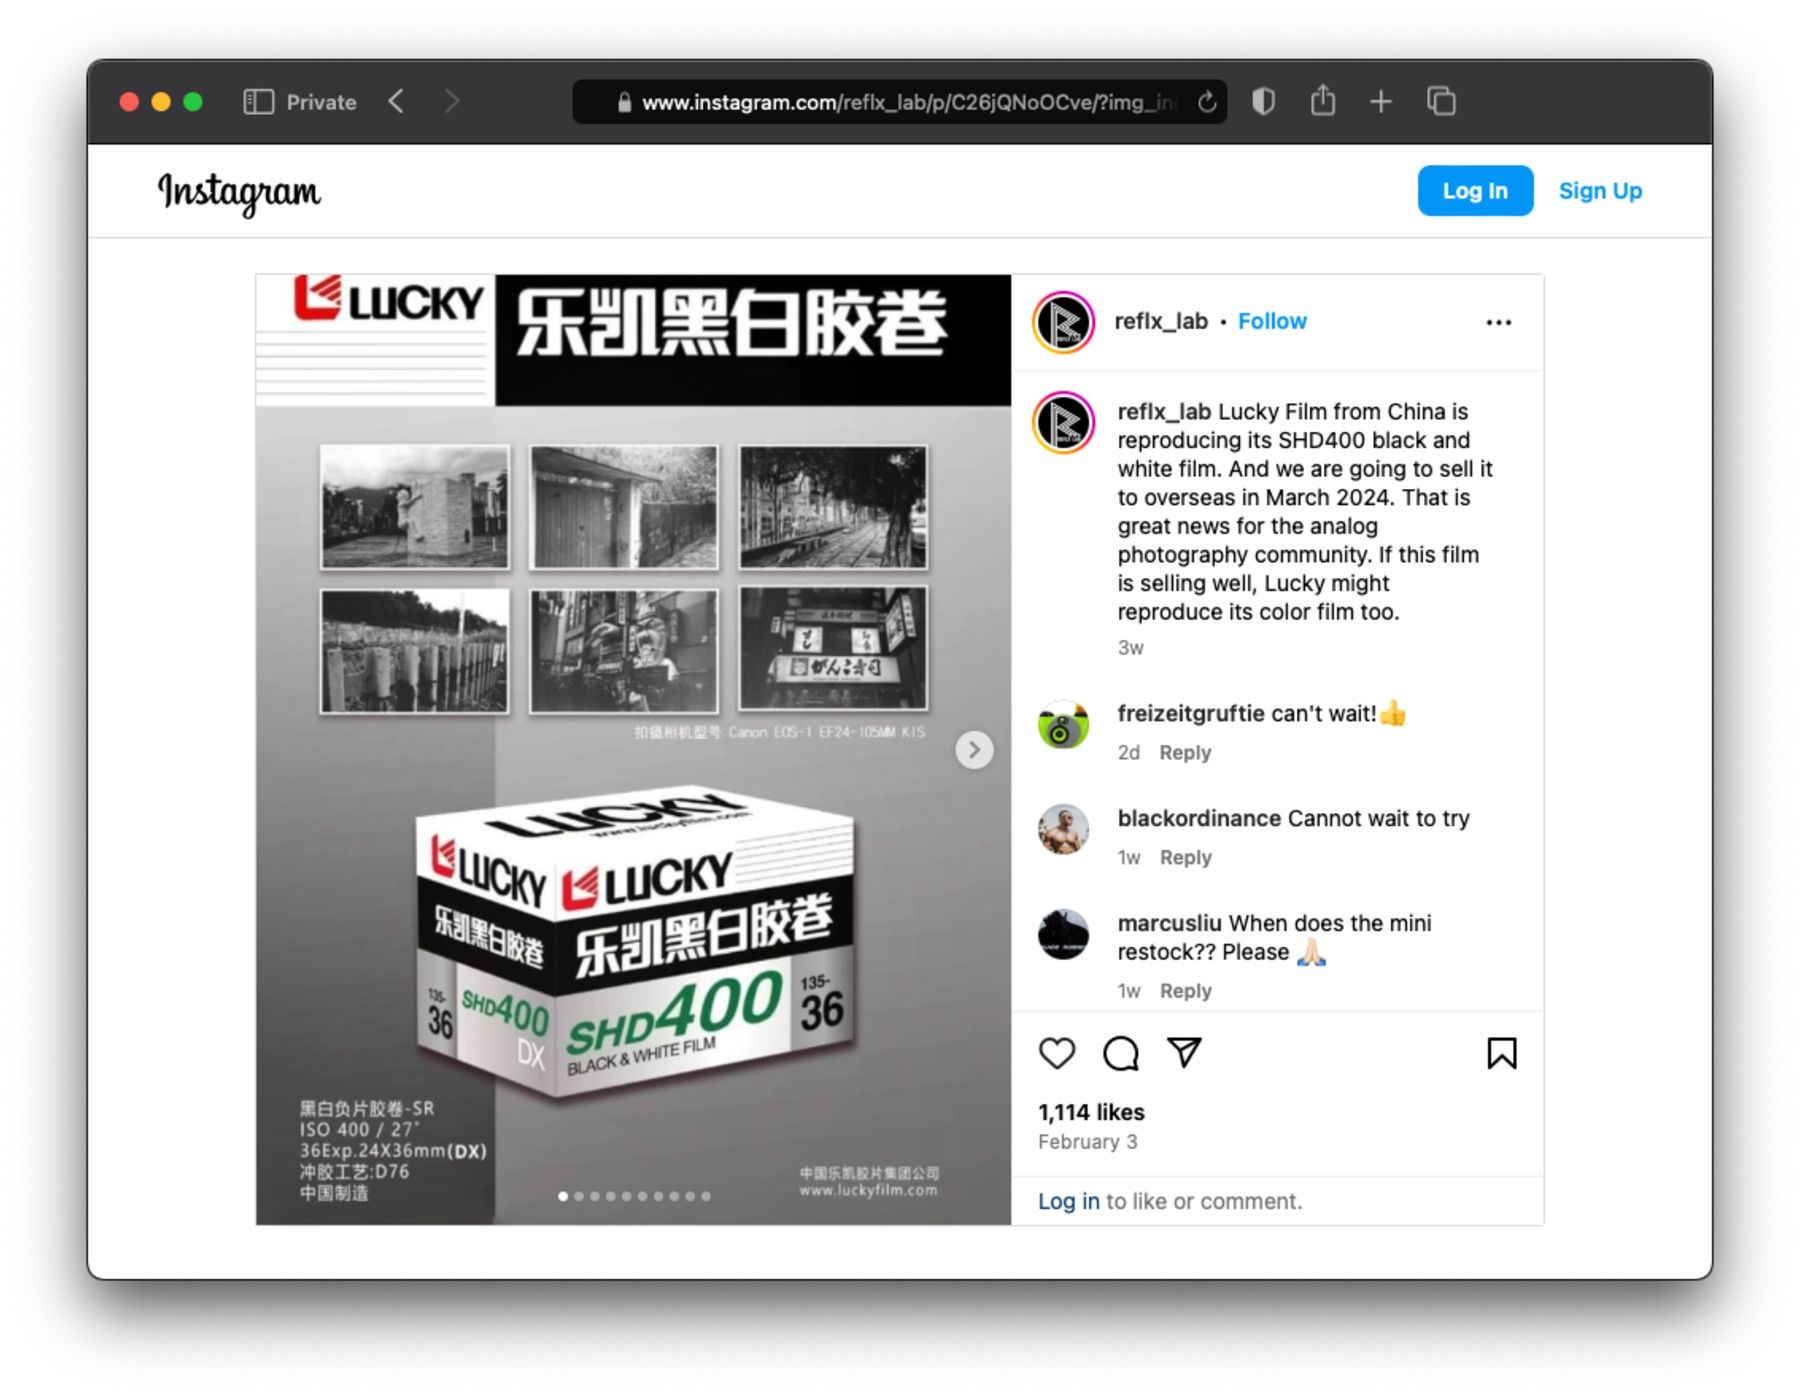 A screenshot of Lucky film's Instagram announcement of their film SHD400 coming back into production.